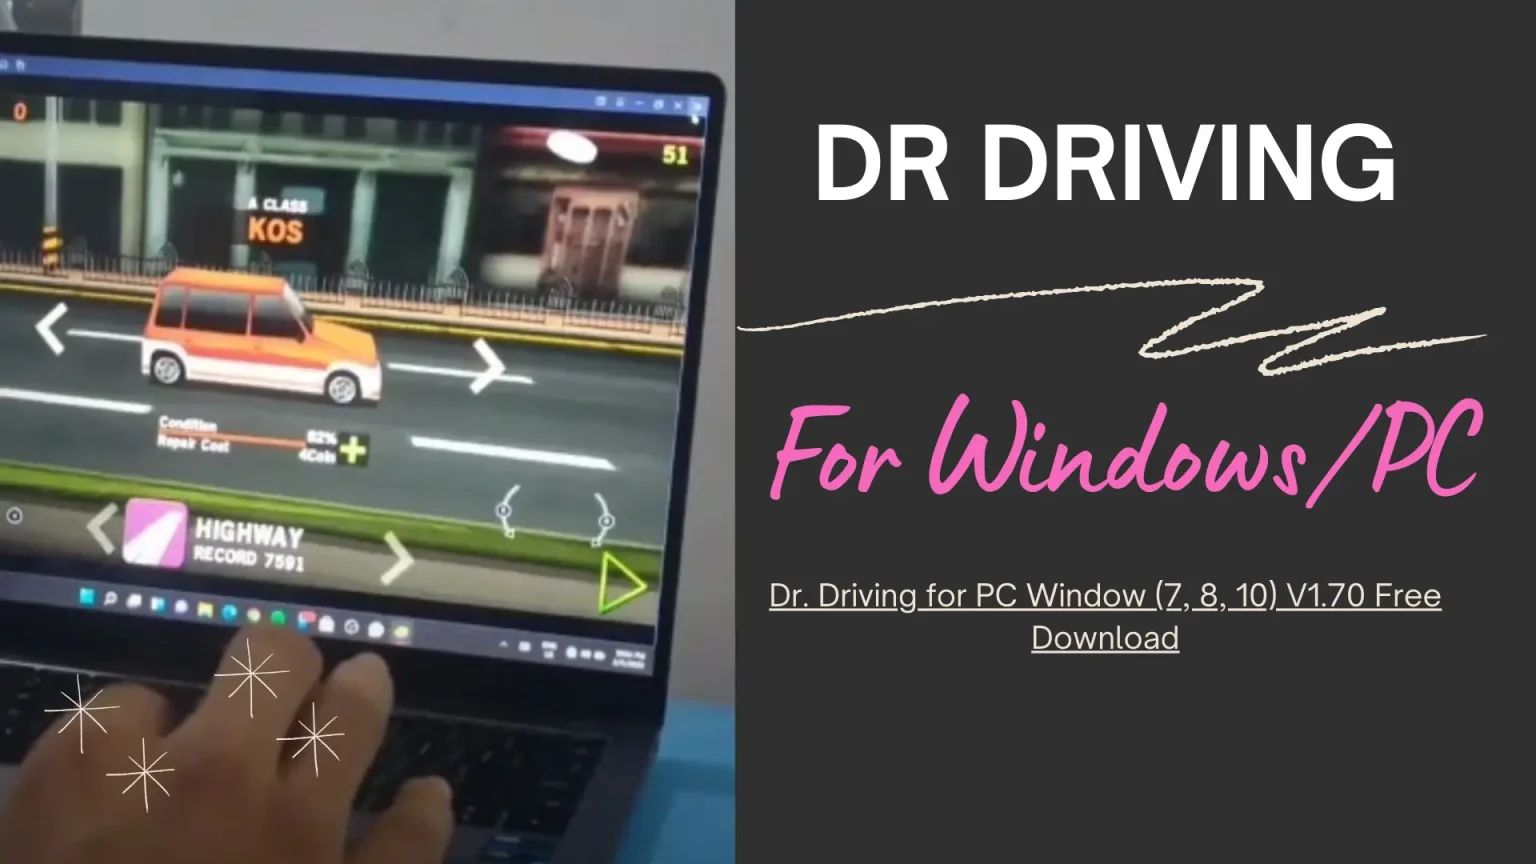 Dr. Driving for PC Window 7 8 10 V1.70 Free Download